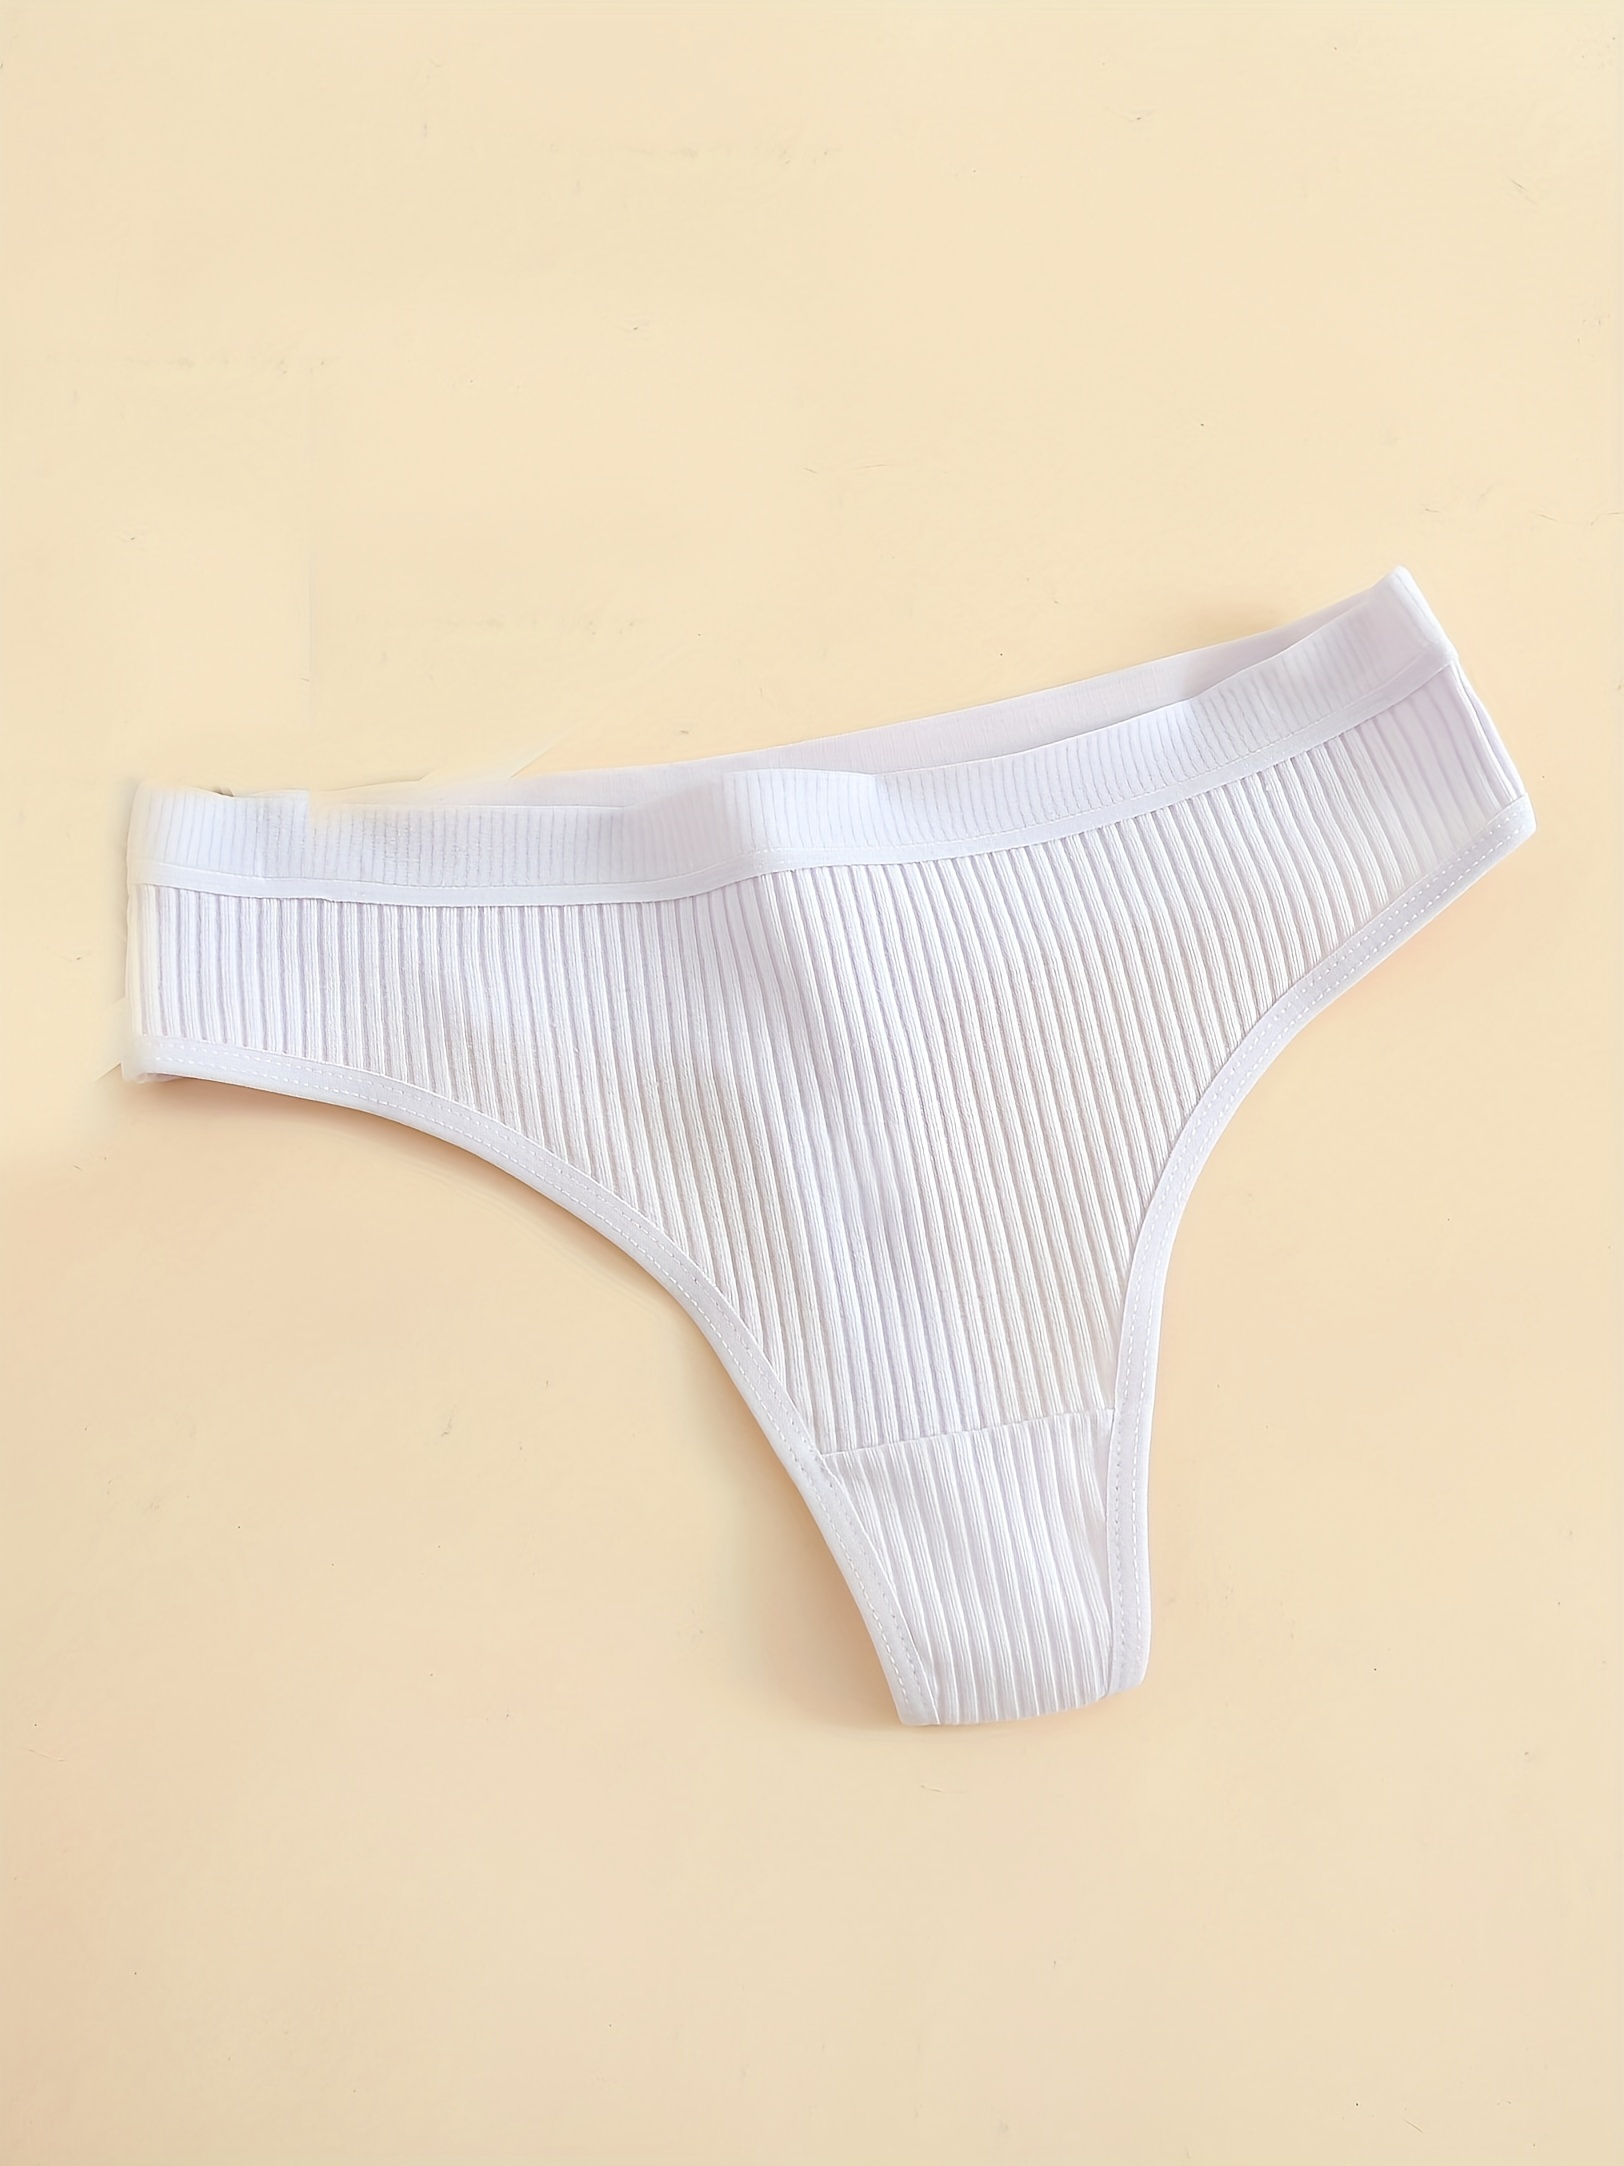 Women's Fitness Underwear Breathable Seamless Thong Panties No